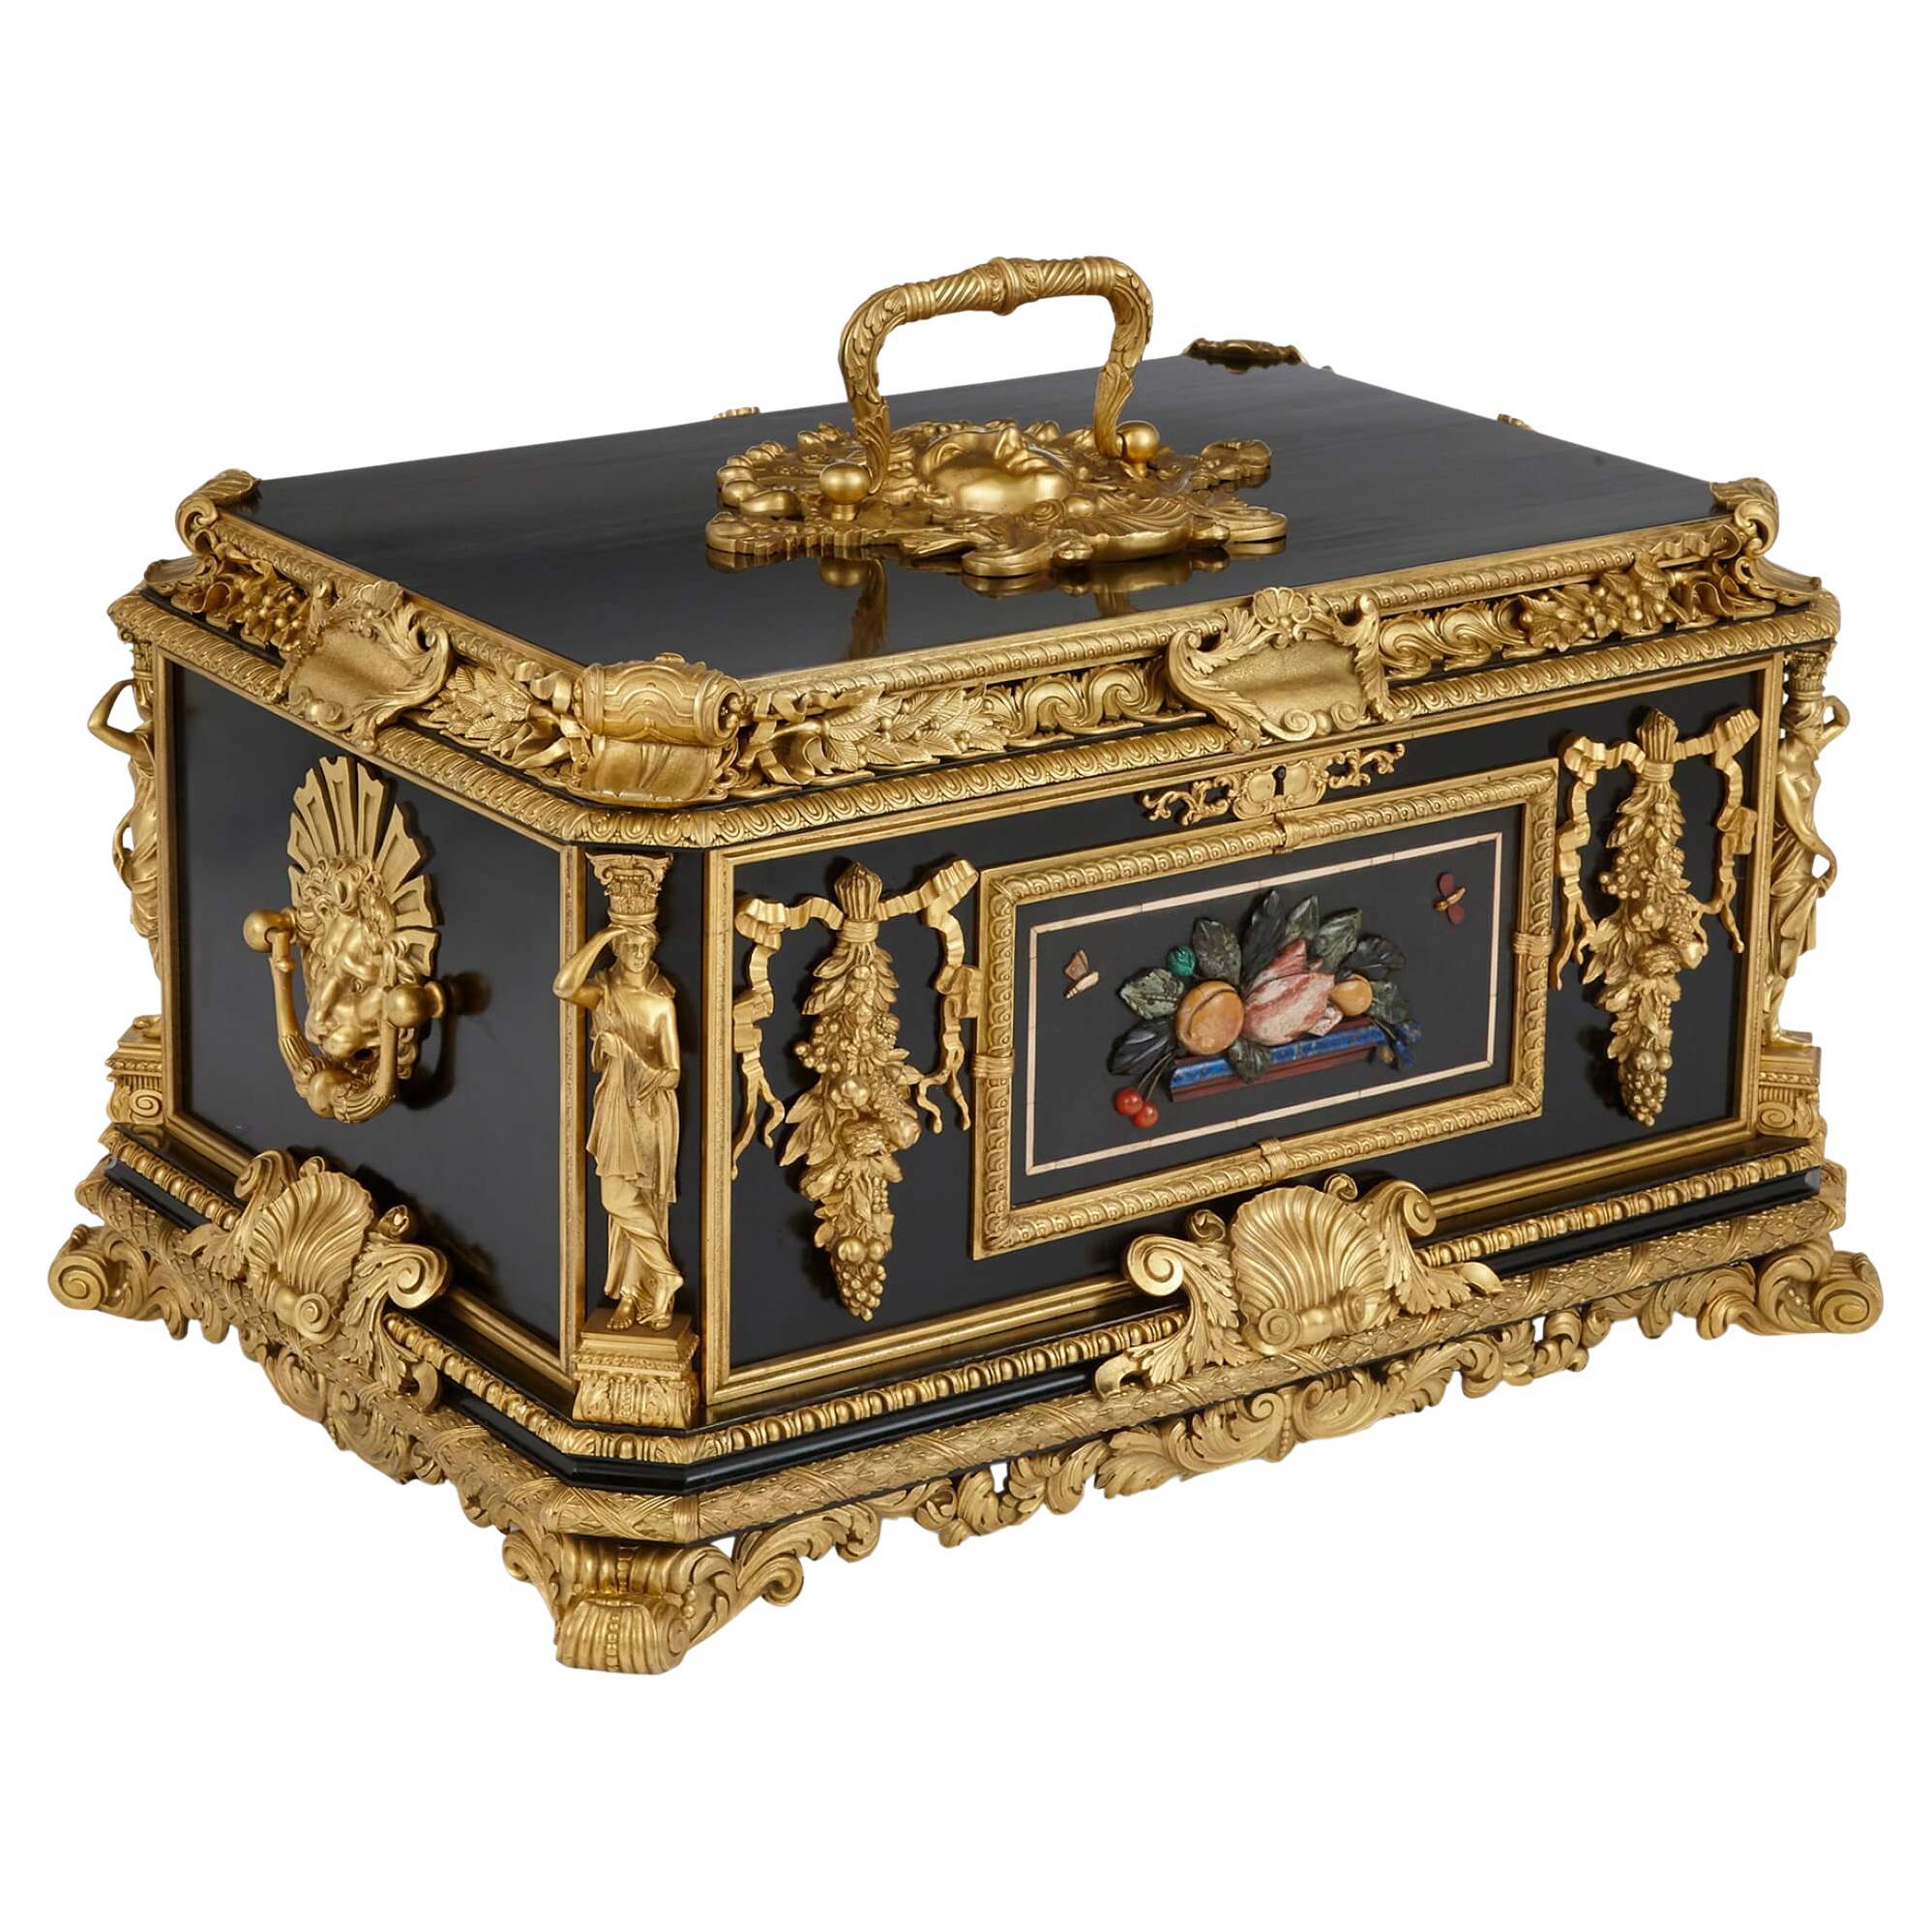 Magnificent and large ormolu and hardstone Regency period ebonized wooden casket